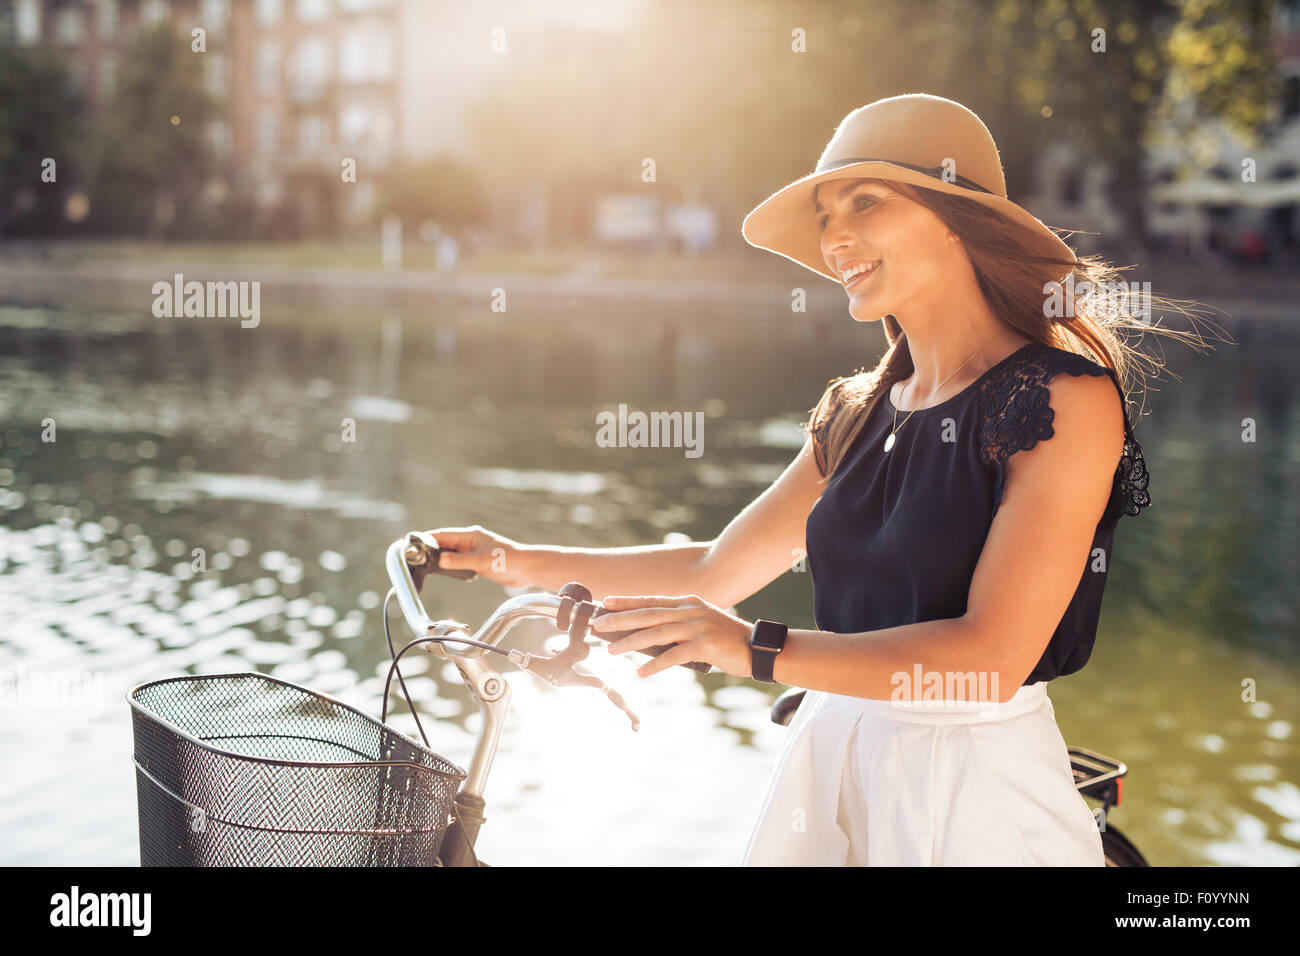 Image of beautiful woman with a bicycle at summer time near the pond at park. Female model wearing hat looking away smiling. Stock Photo